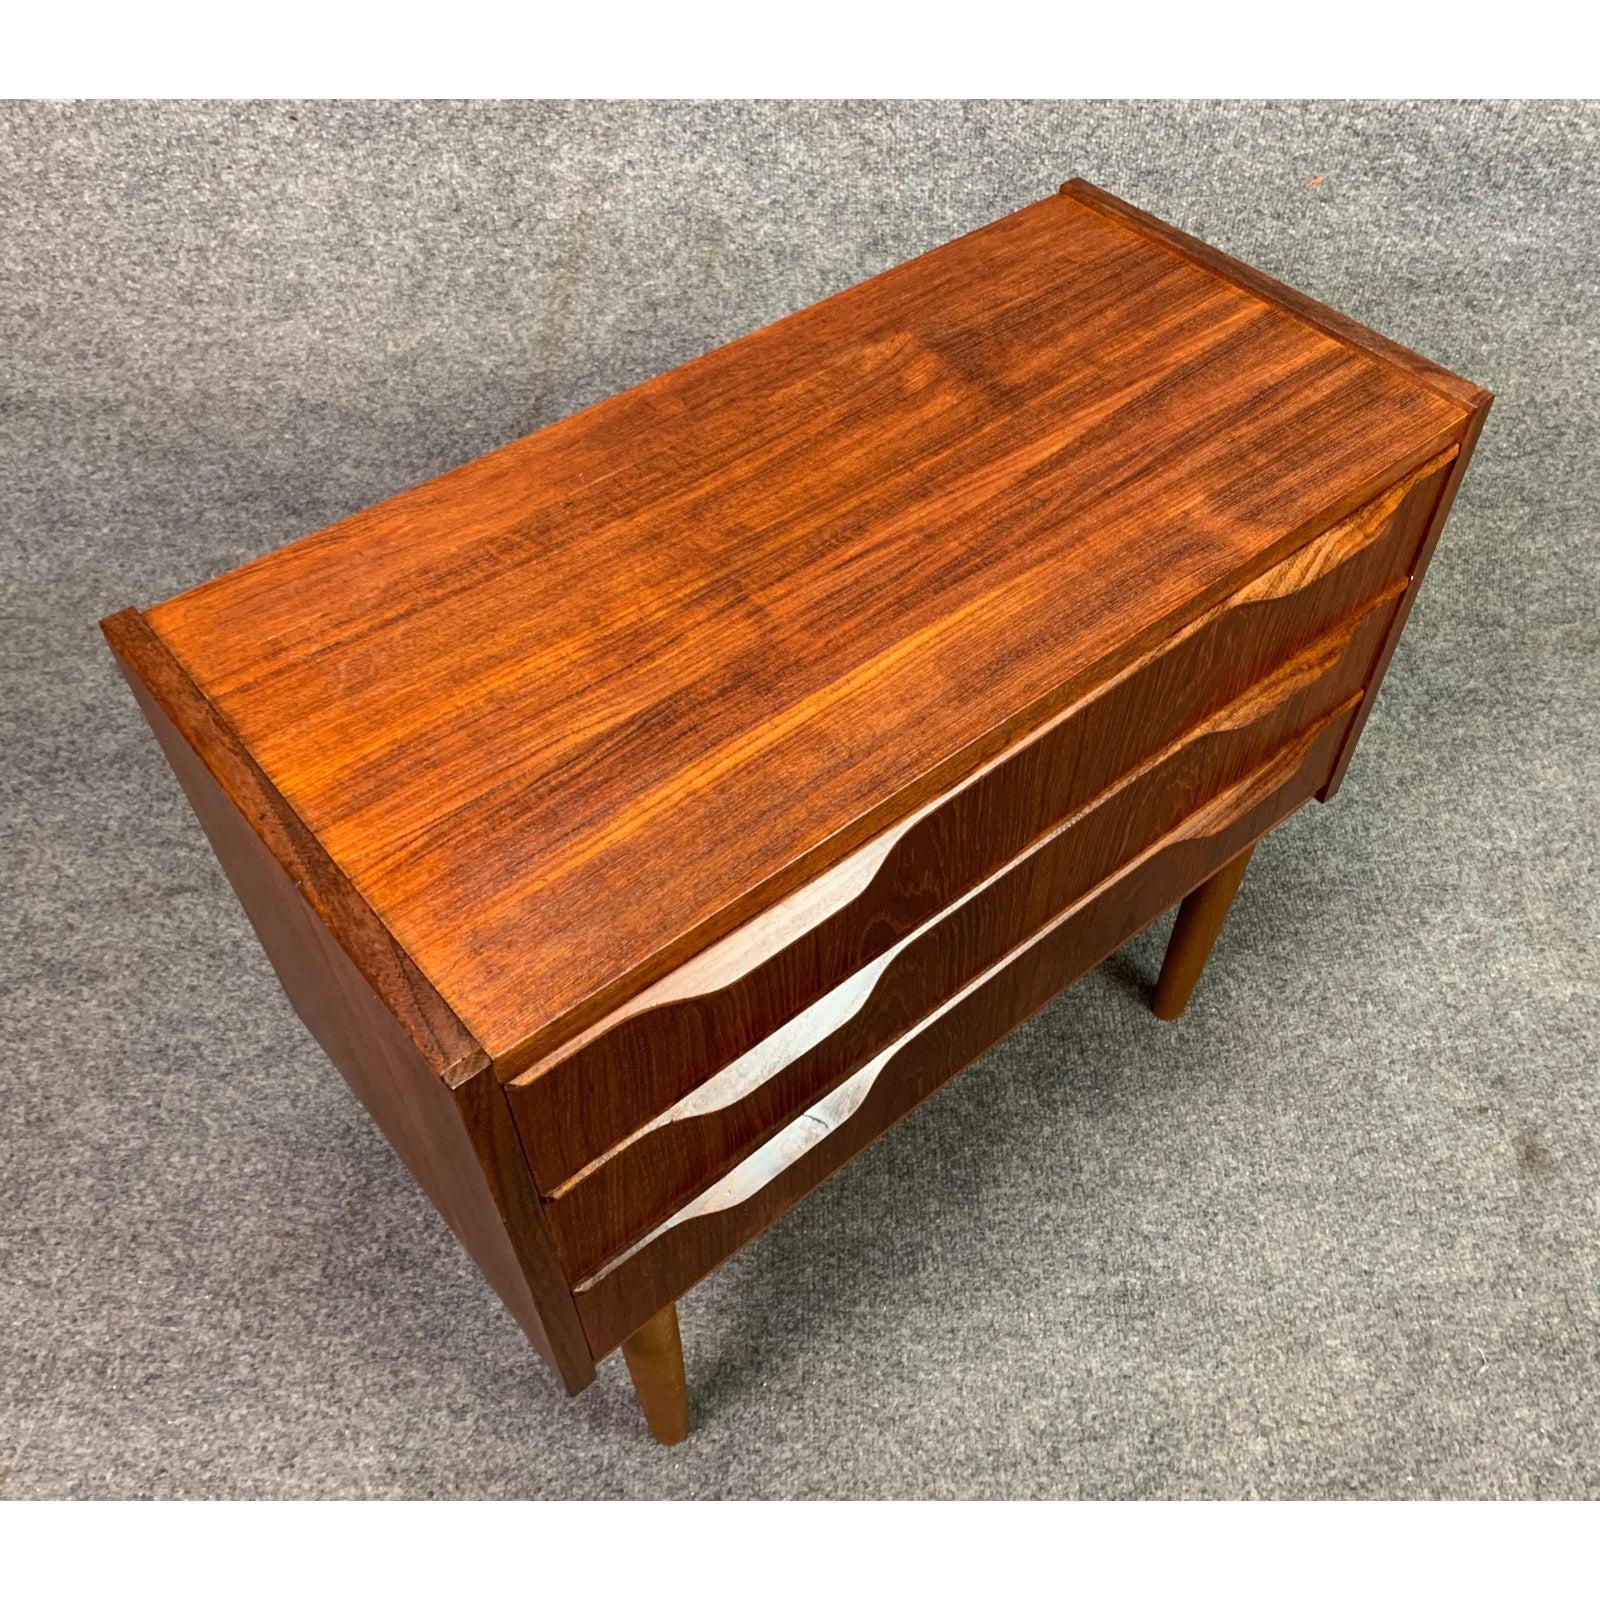 Here is a beautiful Scandinavian Modern chest of drawers, nightstand in teak wood from the 1960s recently imported from Denmark to Copenhagen before its restoration.
This lovely piece, with its vibrant wood grain, features three dove tail built